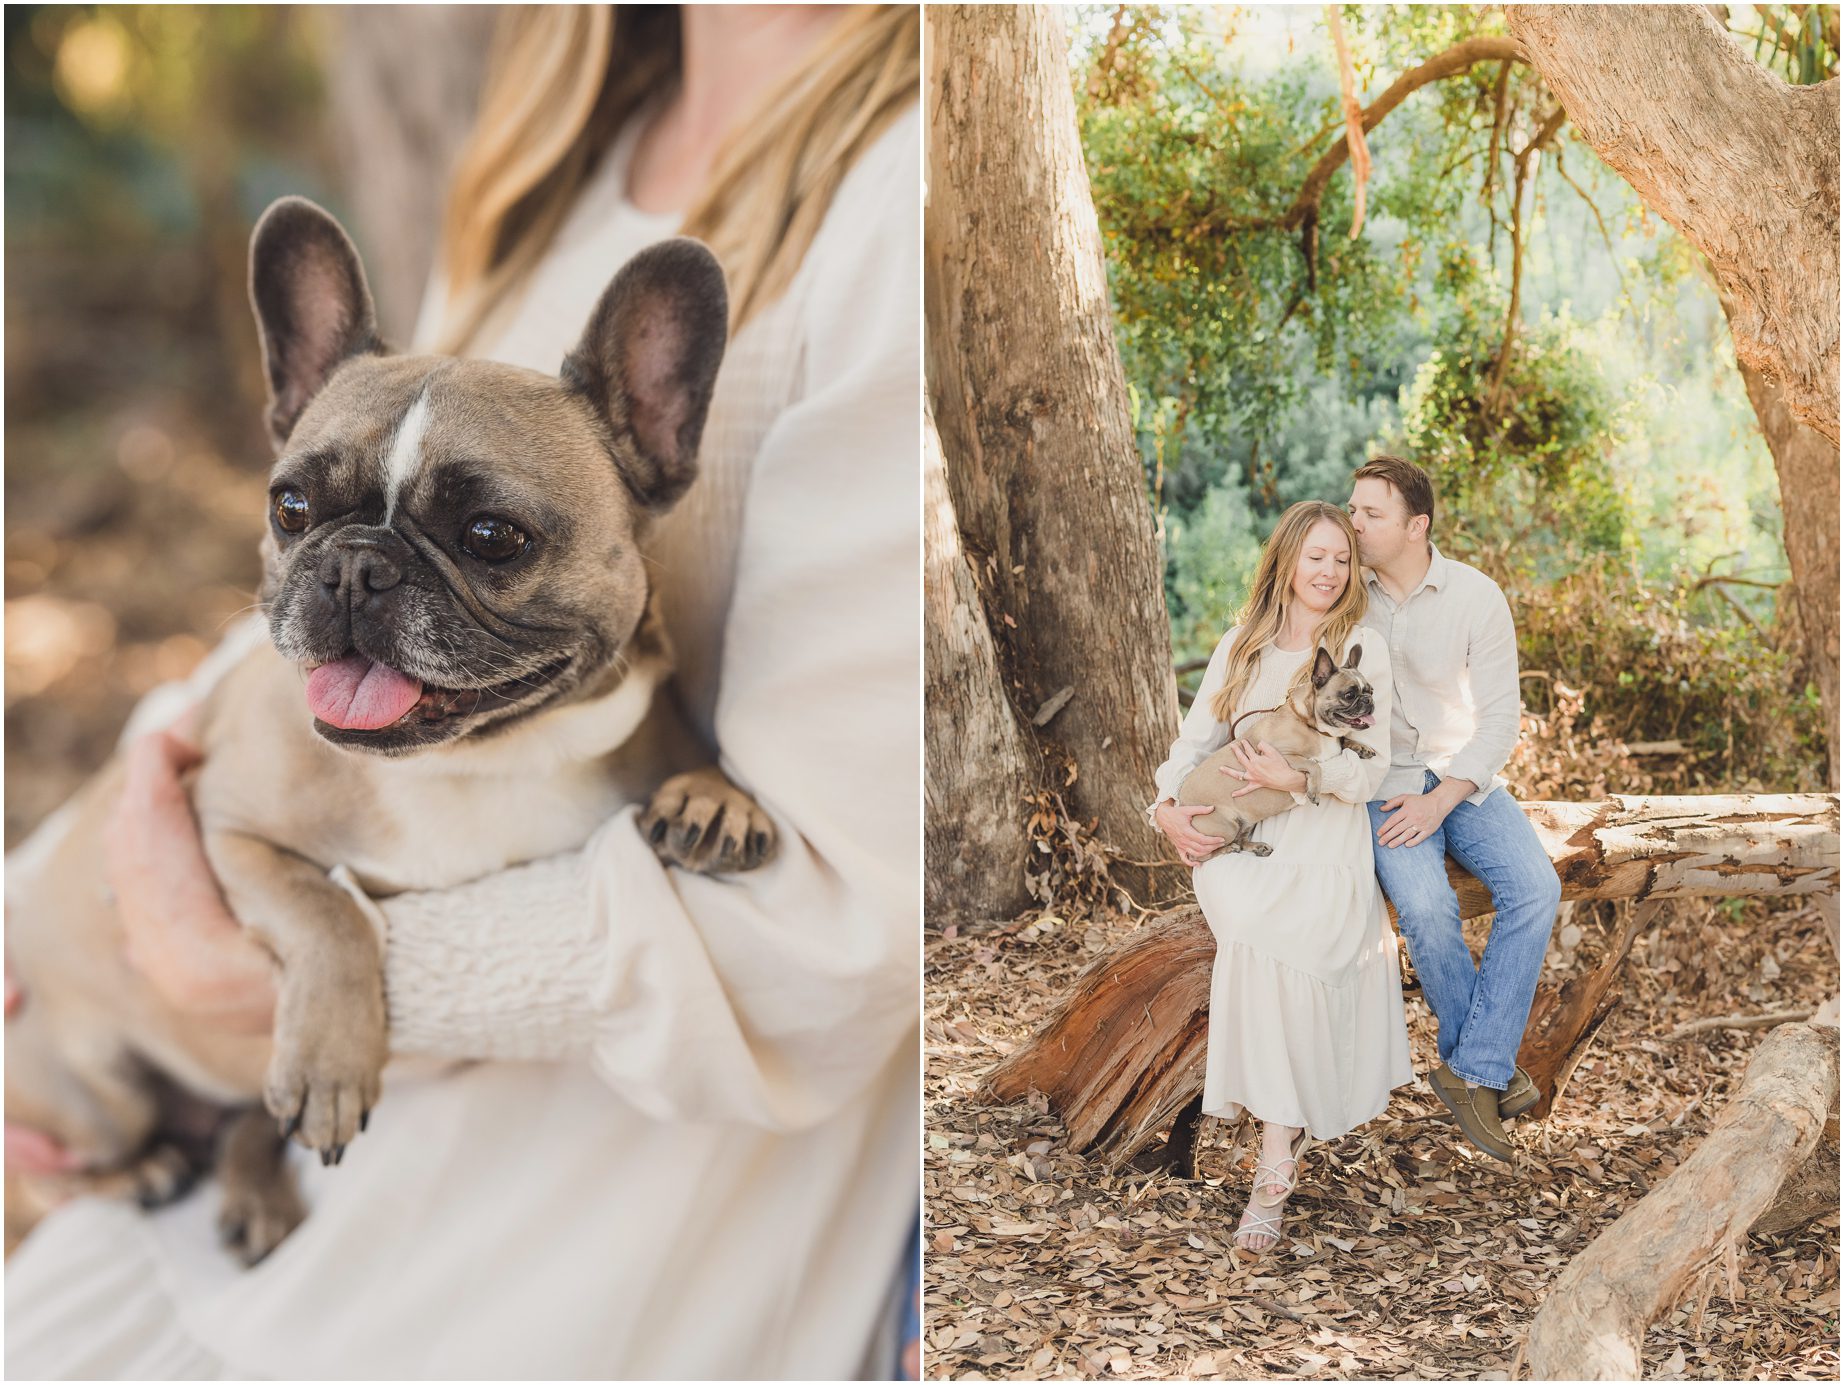 A couple and their dog near a Eucalyptus in the Secret Field In Los Angeles